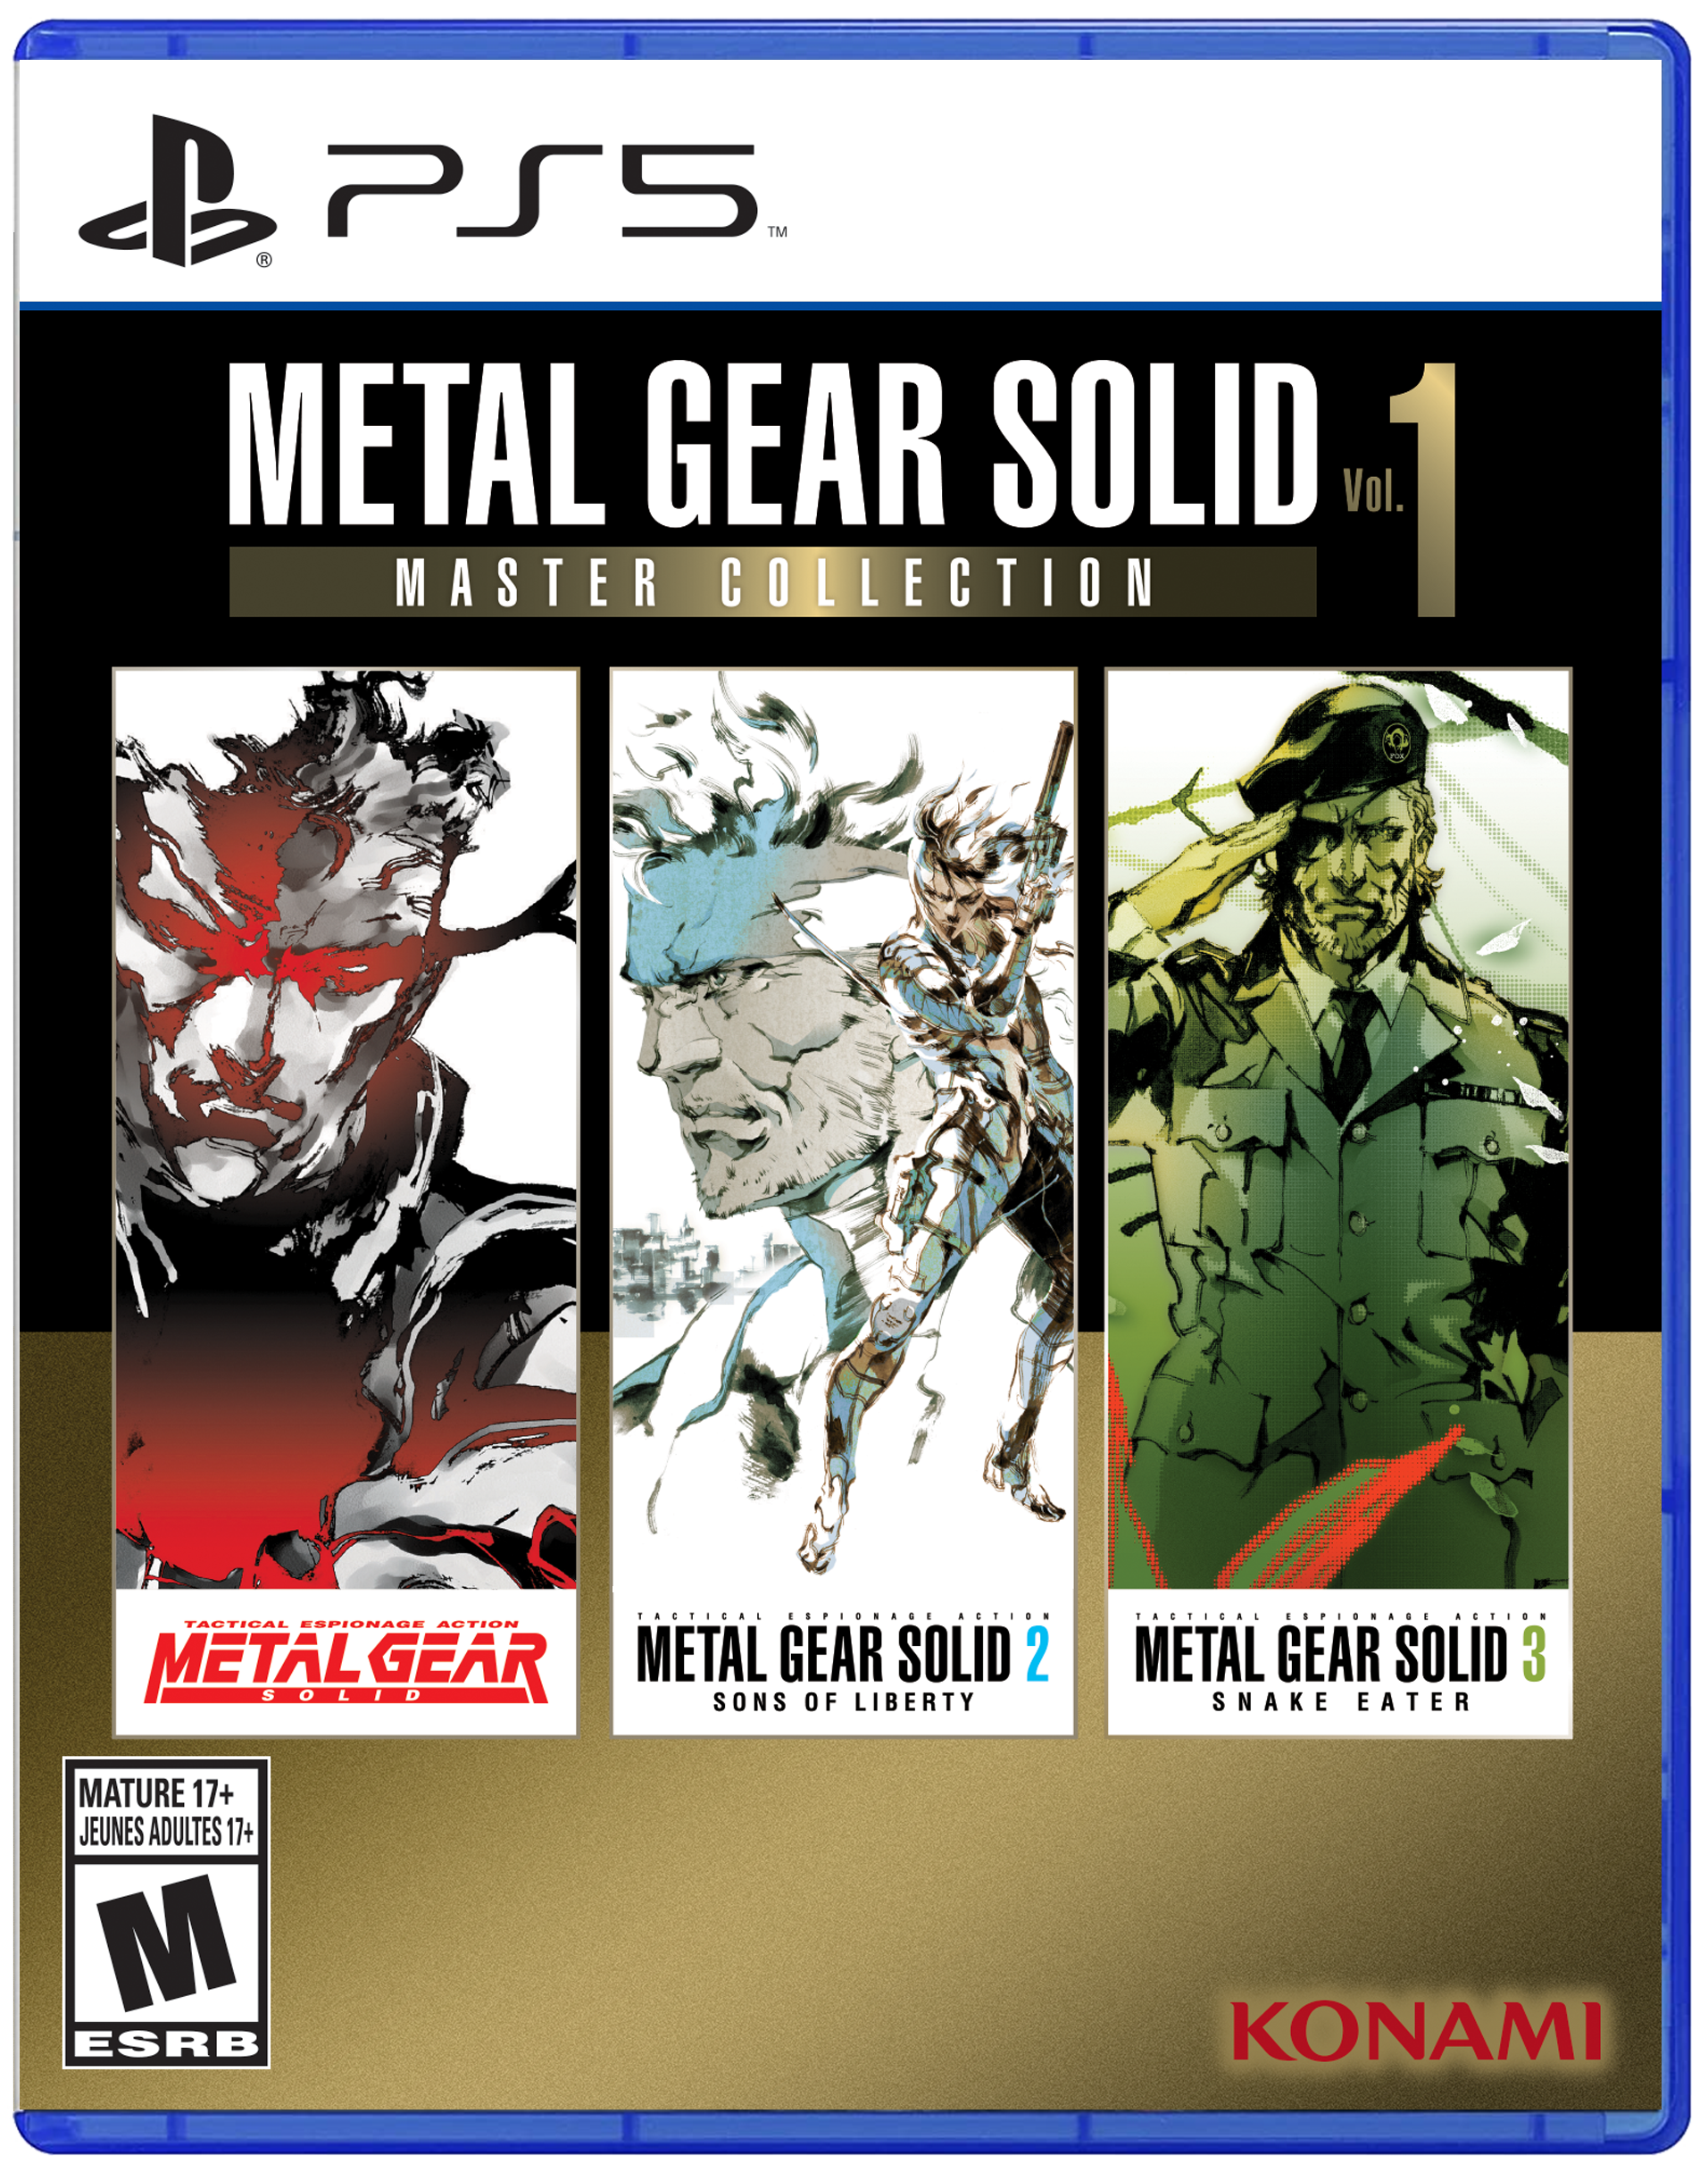 Metal Gear Solid Master Collection Vol. 1 Pre-Order Guide